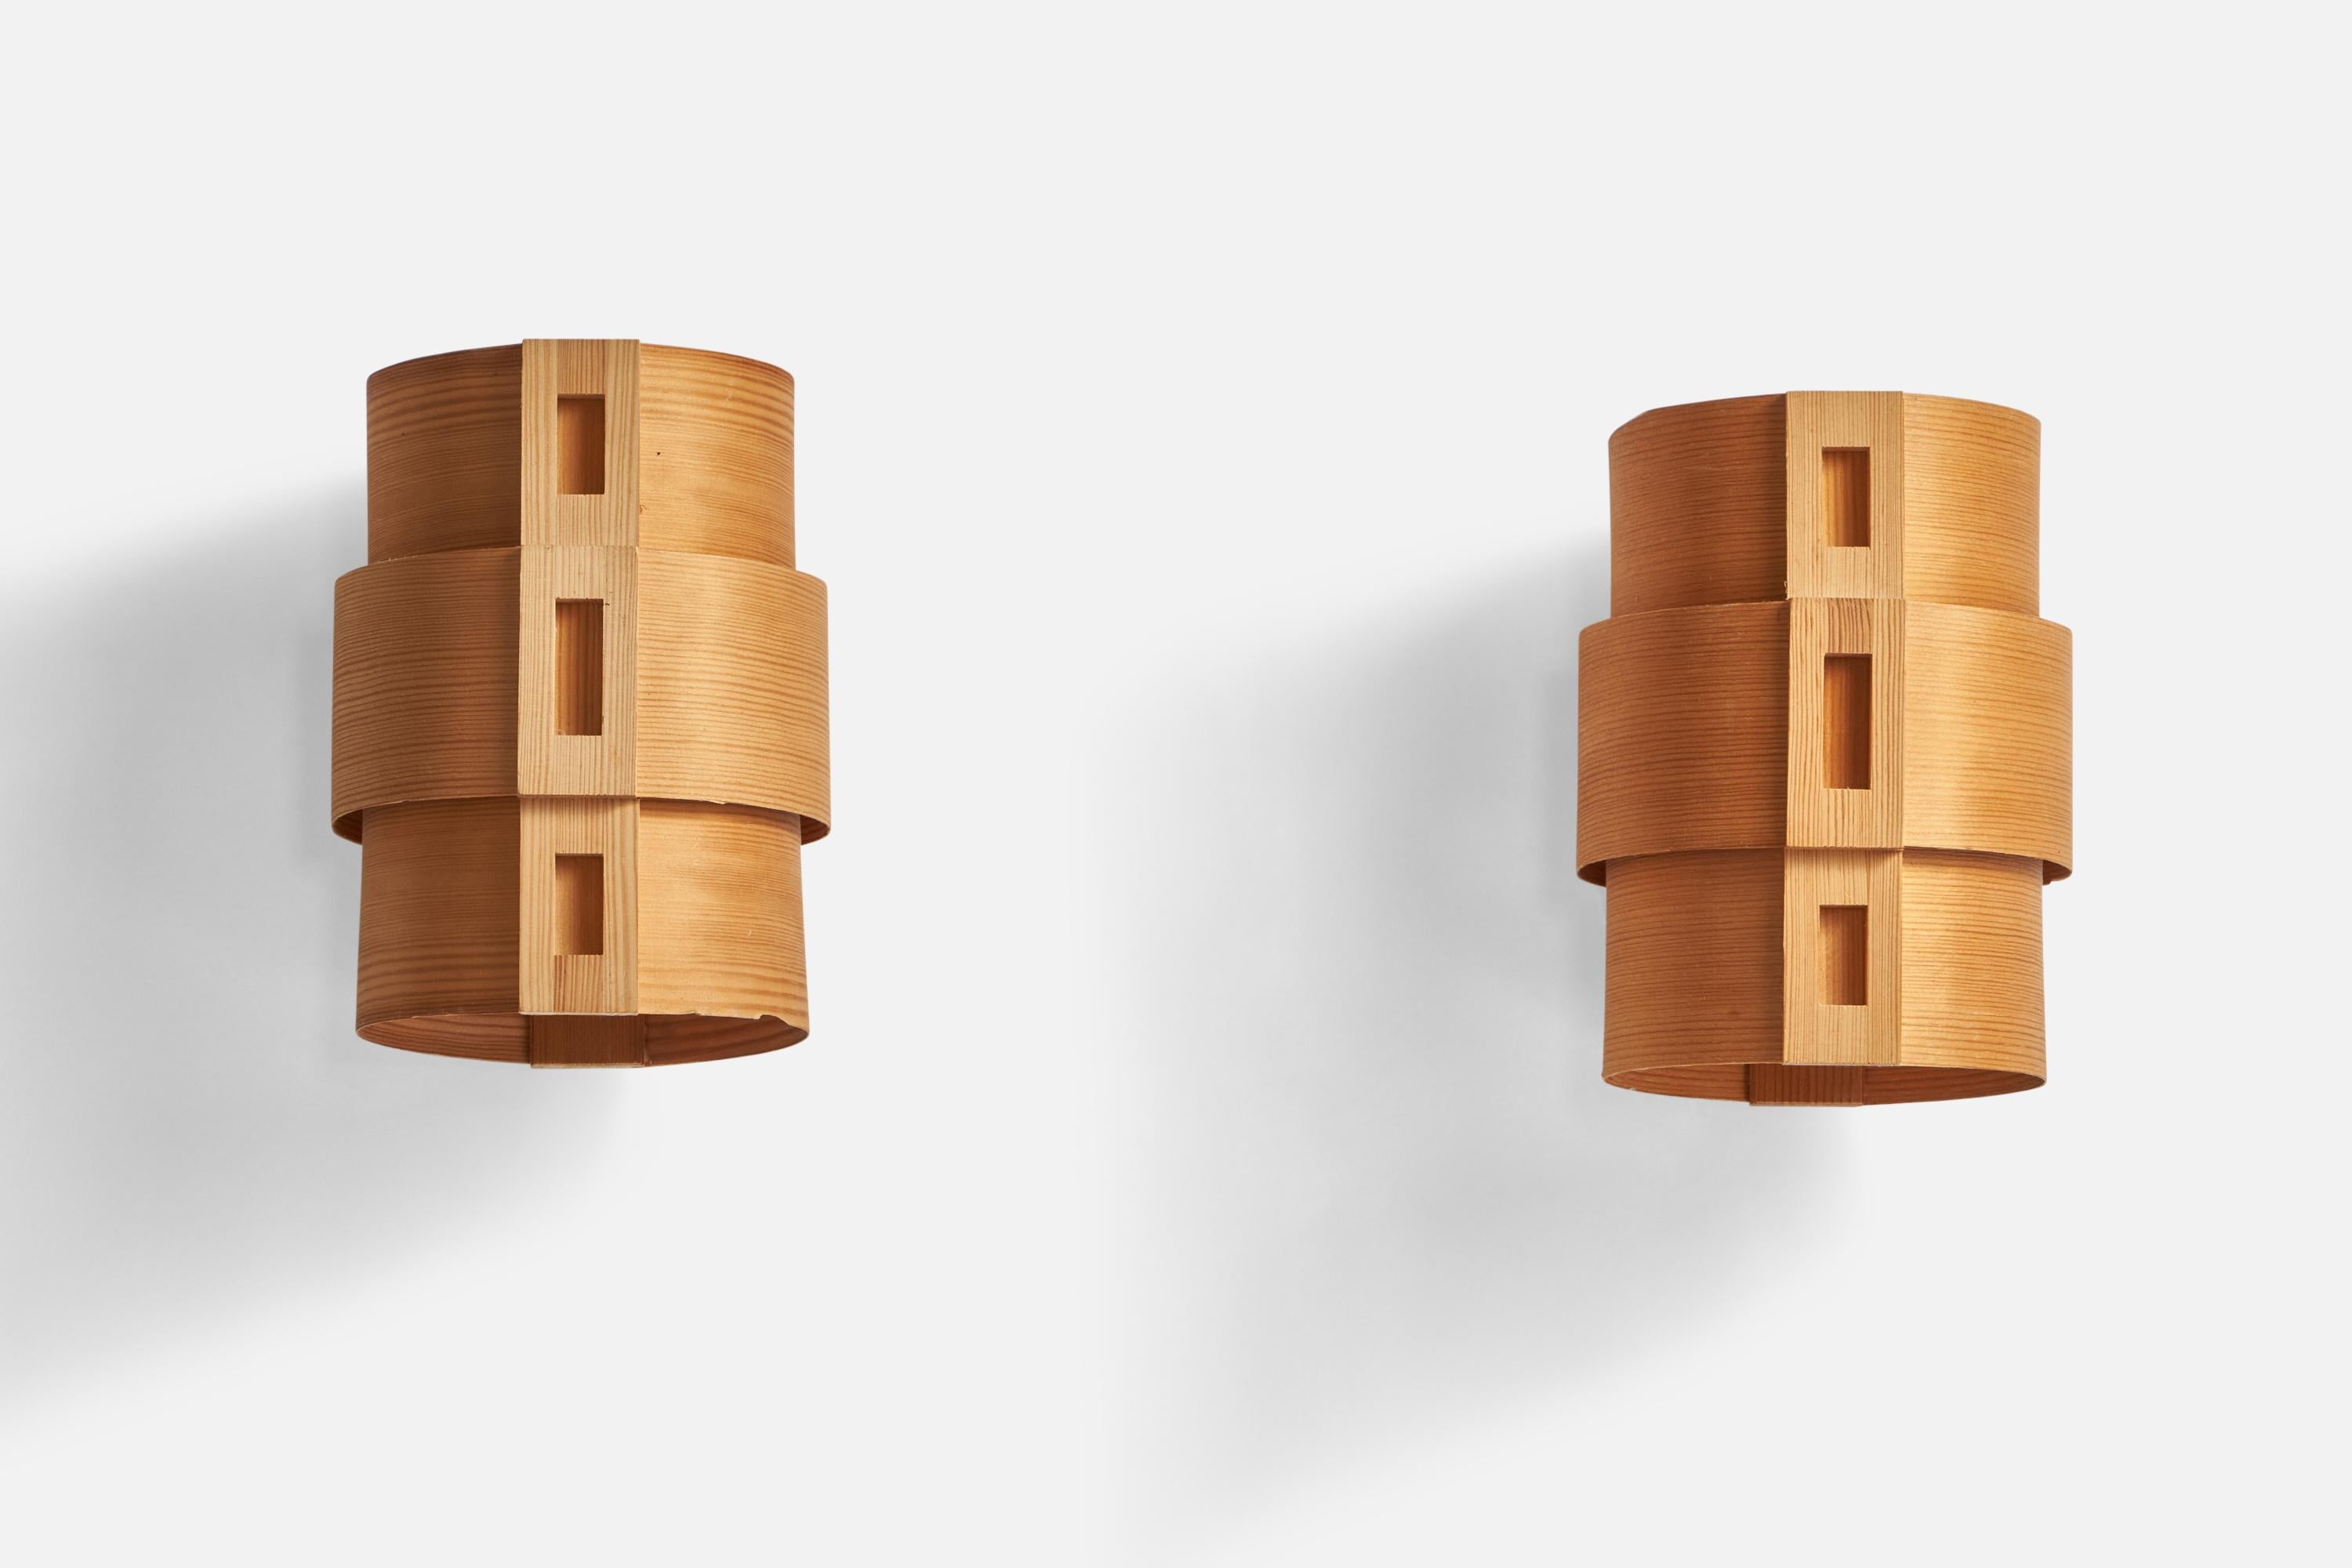 A pair of pine and moulded pine veneer wall lights designed and produced in Sweden, c. 1970s.

Overall Dimensions (inches): 7.5” H x 5.72” Diameter
Back Plate Dimensions (inches): n/a
Bulb Specifications: E-14 Bulbs
Number of Sockets: 2
All lighting